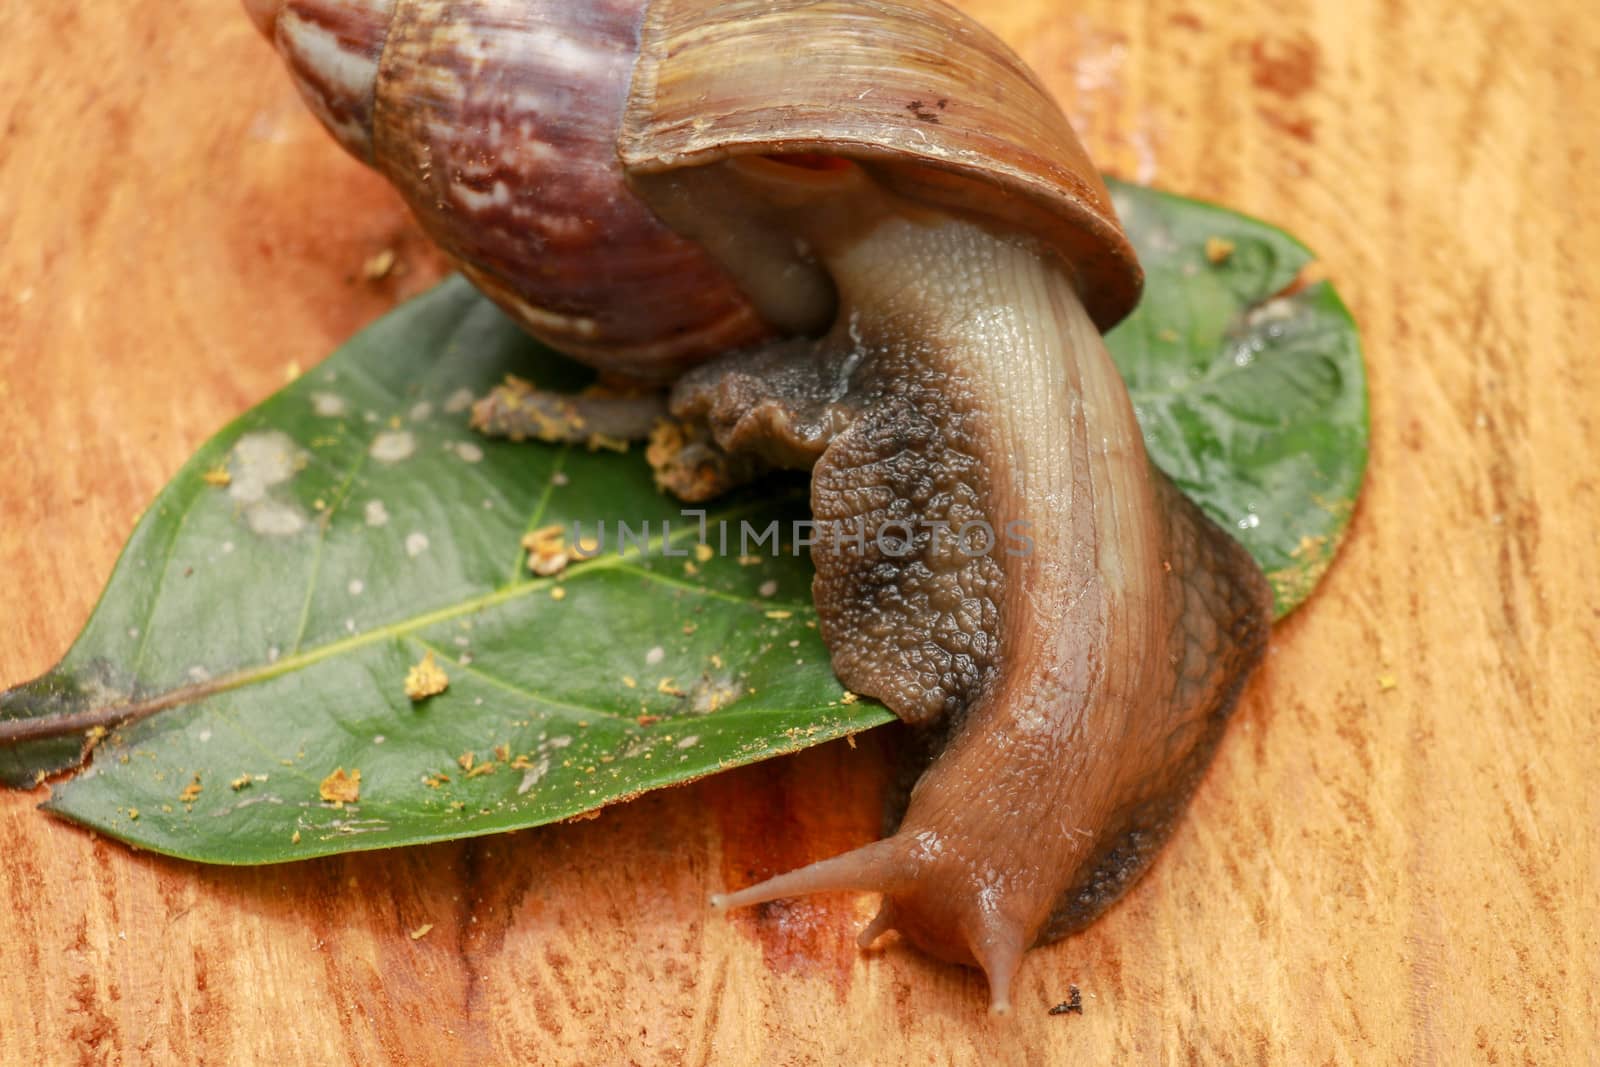 Beautiful patterned brown snail crawls on a wooden surface. Giant african snail by Sanatana2008